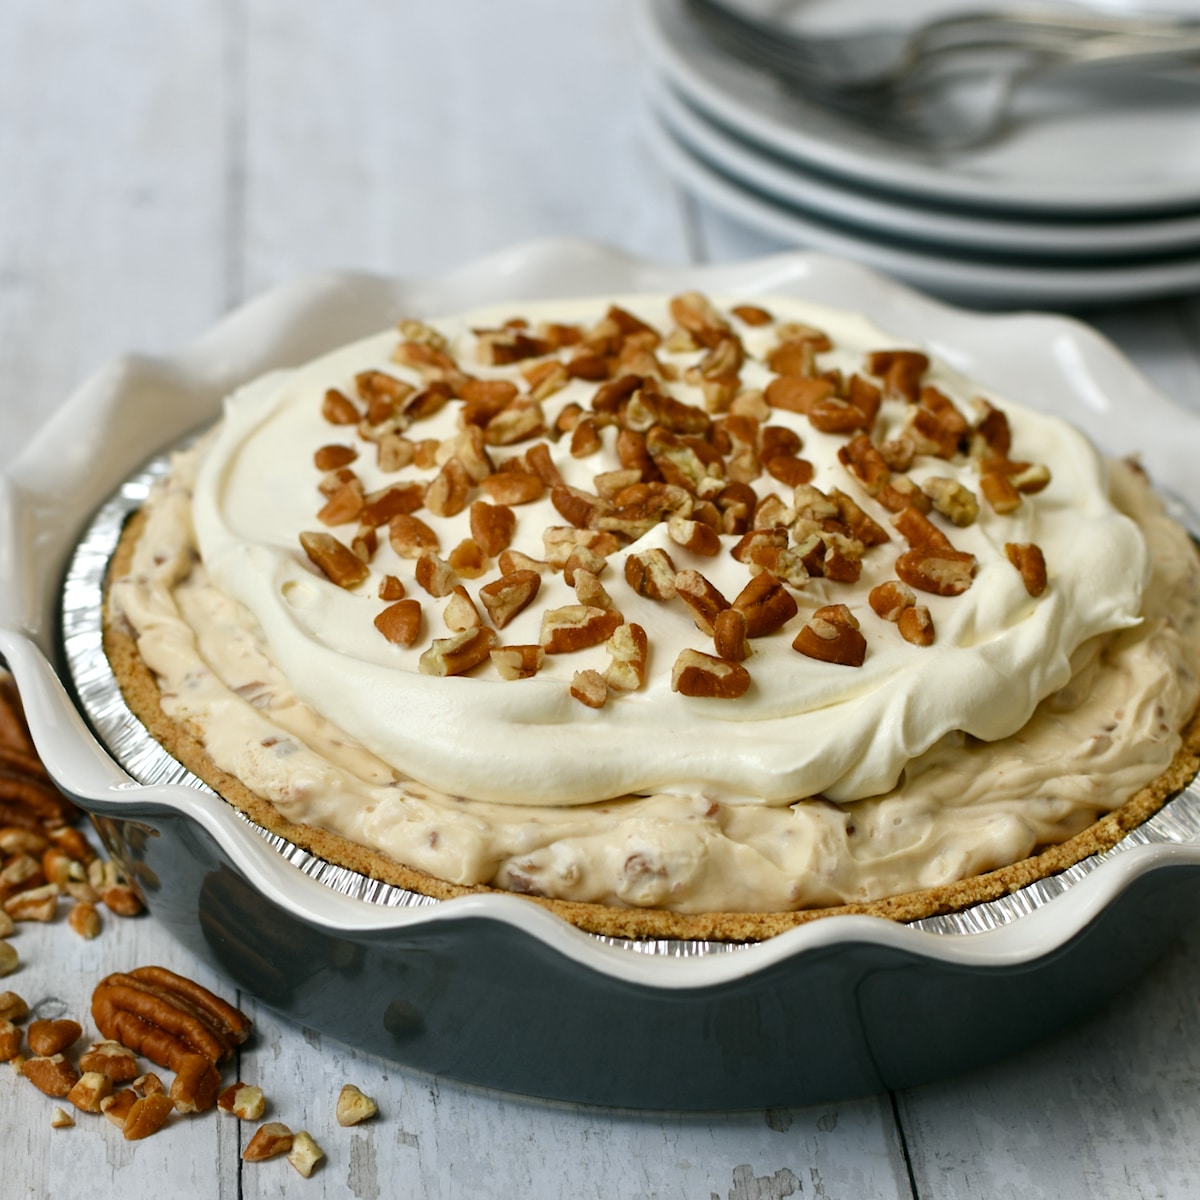 Pecan cream pie with graham cracker crust in a blue fluted pie plate and topped with pecans.